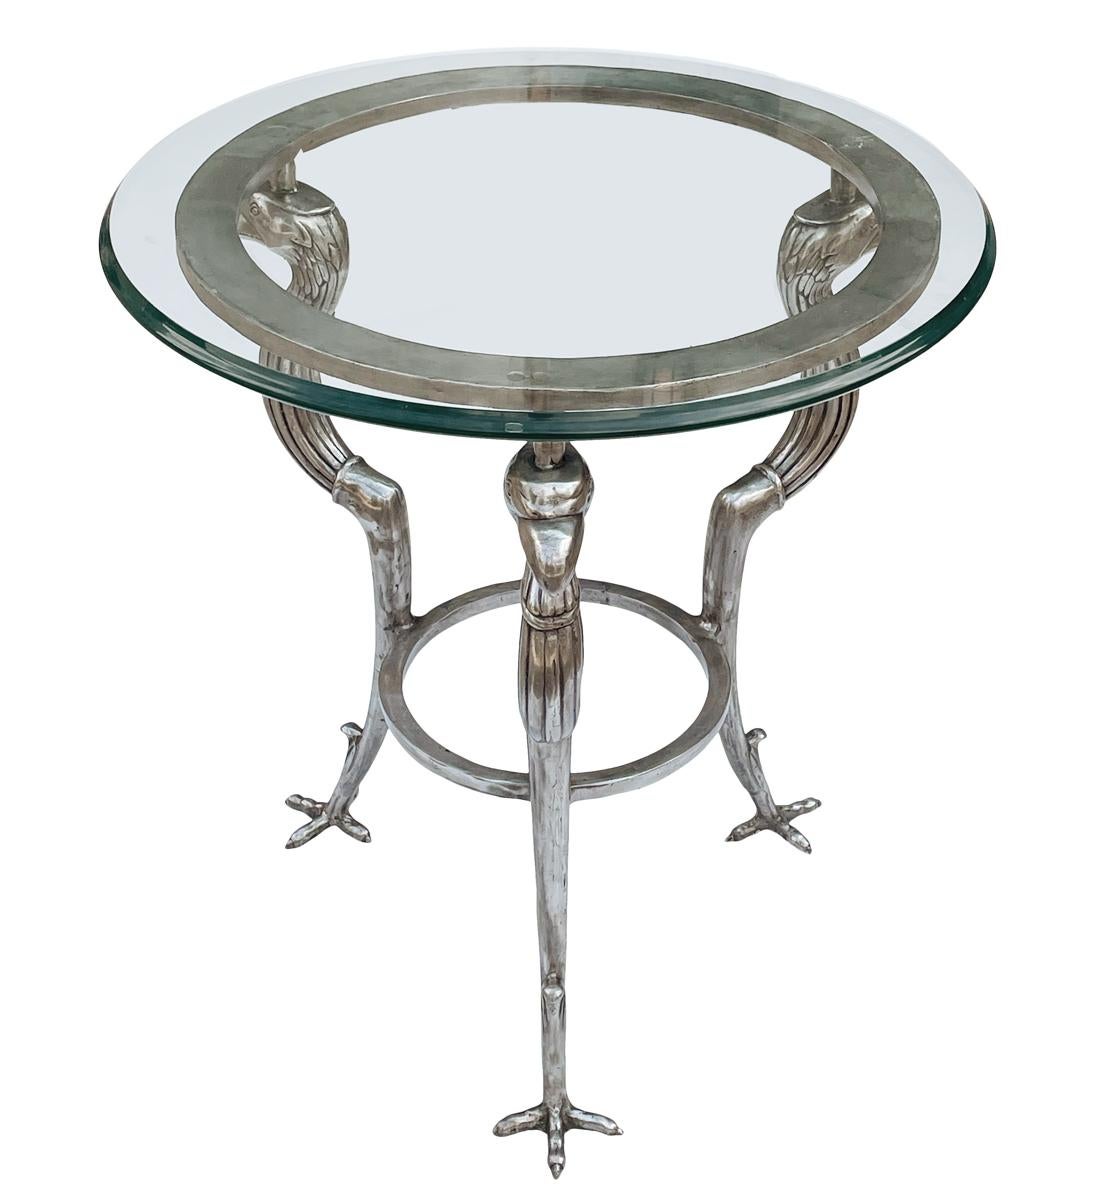 Gorgeous and Sophisticated bird form side tables by Maitland Smith circa 1970's These feature solid pewter / steel metal bases with thick glass tops. Manufacturer labels.